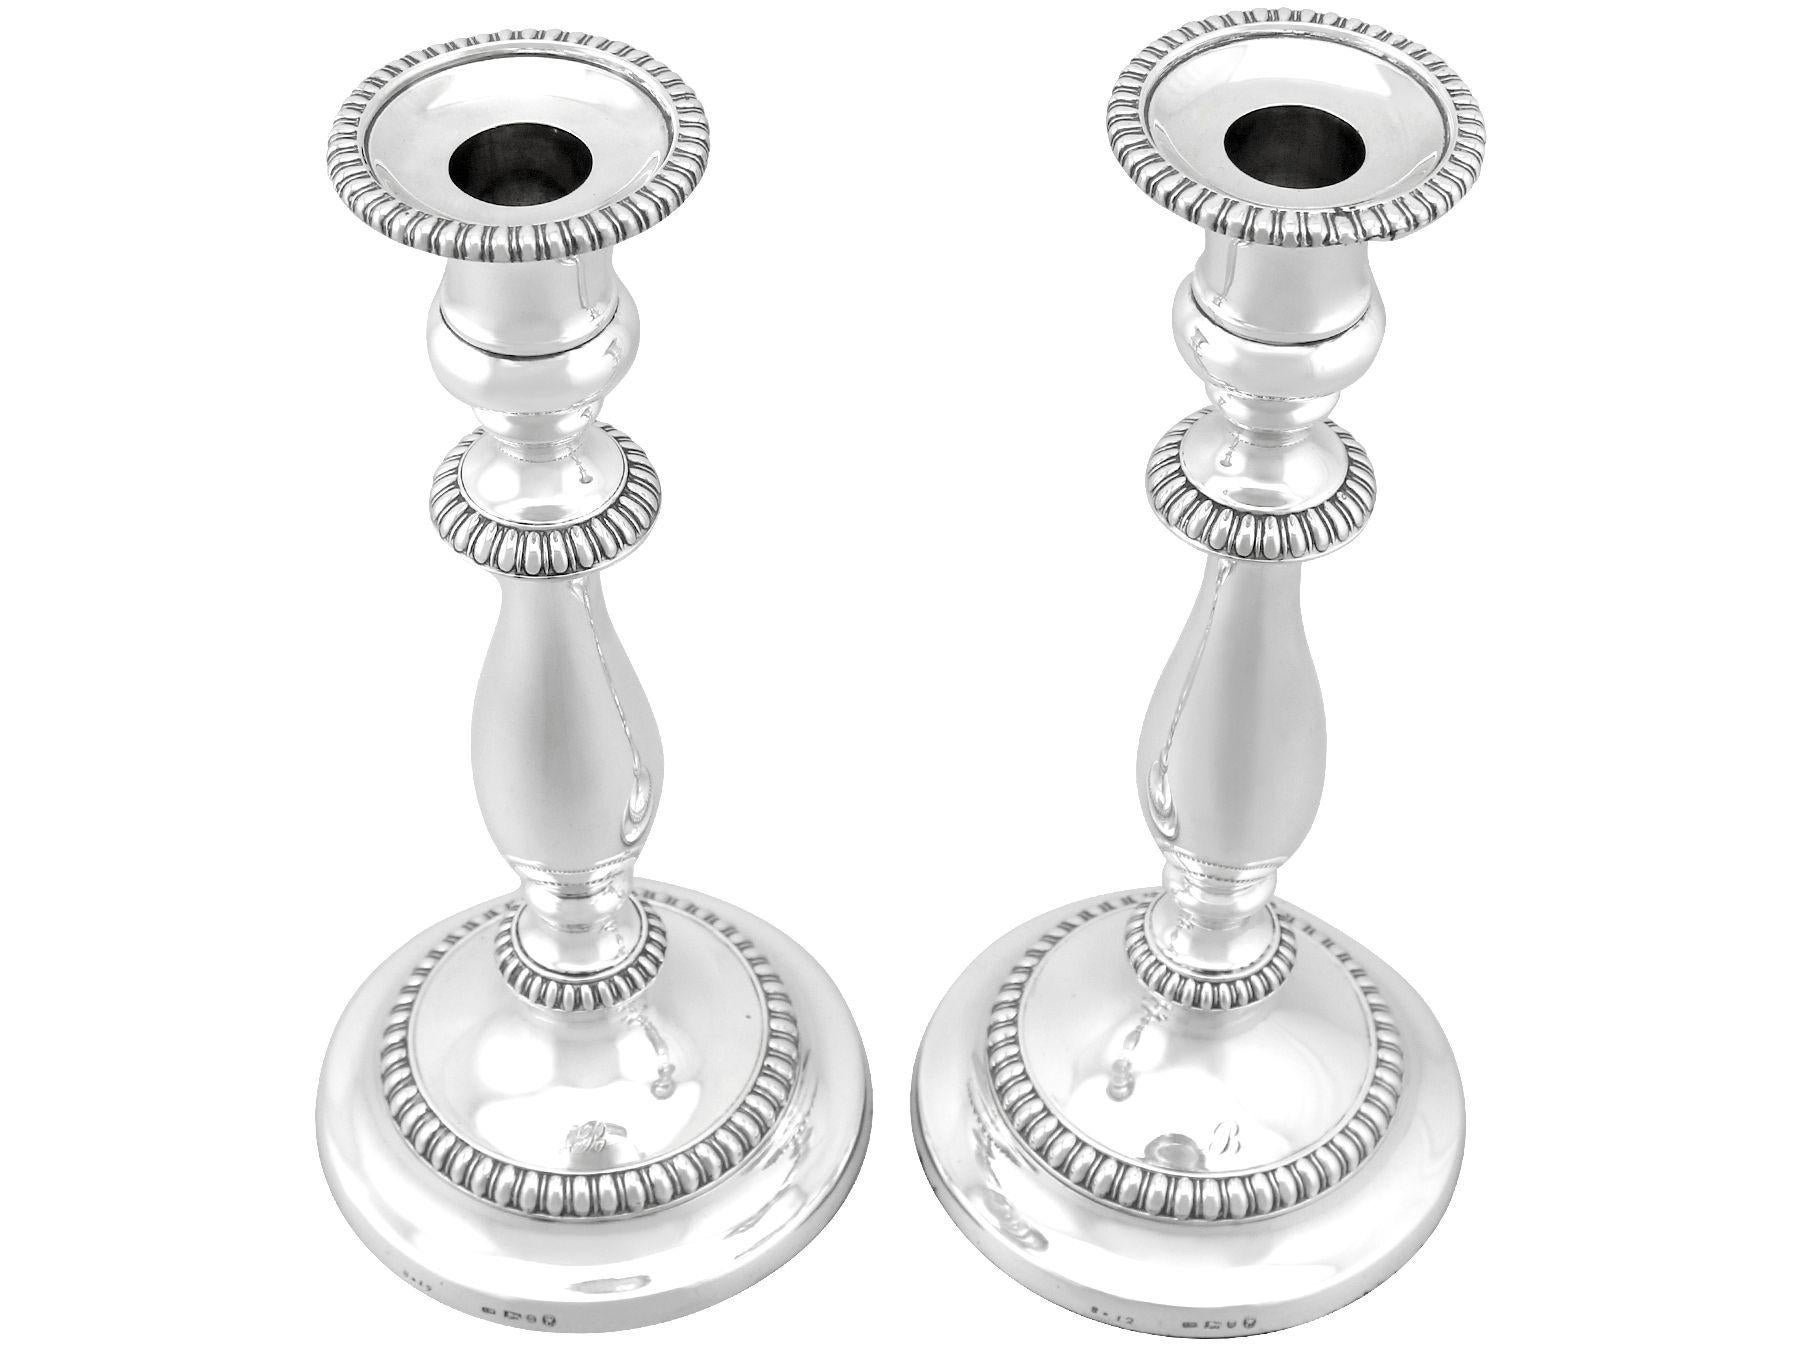 An exceptional, fine and impressive pair of antique George III English sterling silver candlesticks; part of our Georgian ornamental silverware collection

These exceptional antique George III English sterling silver candlesticks have a